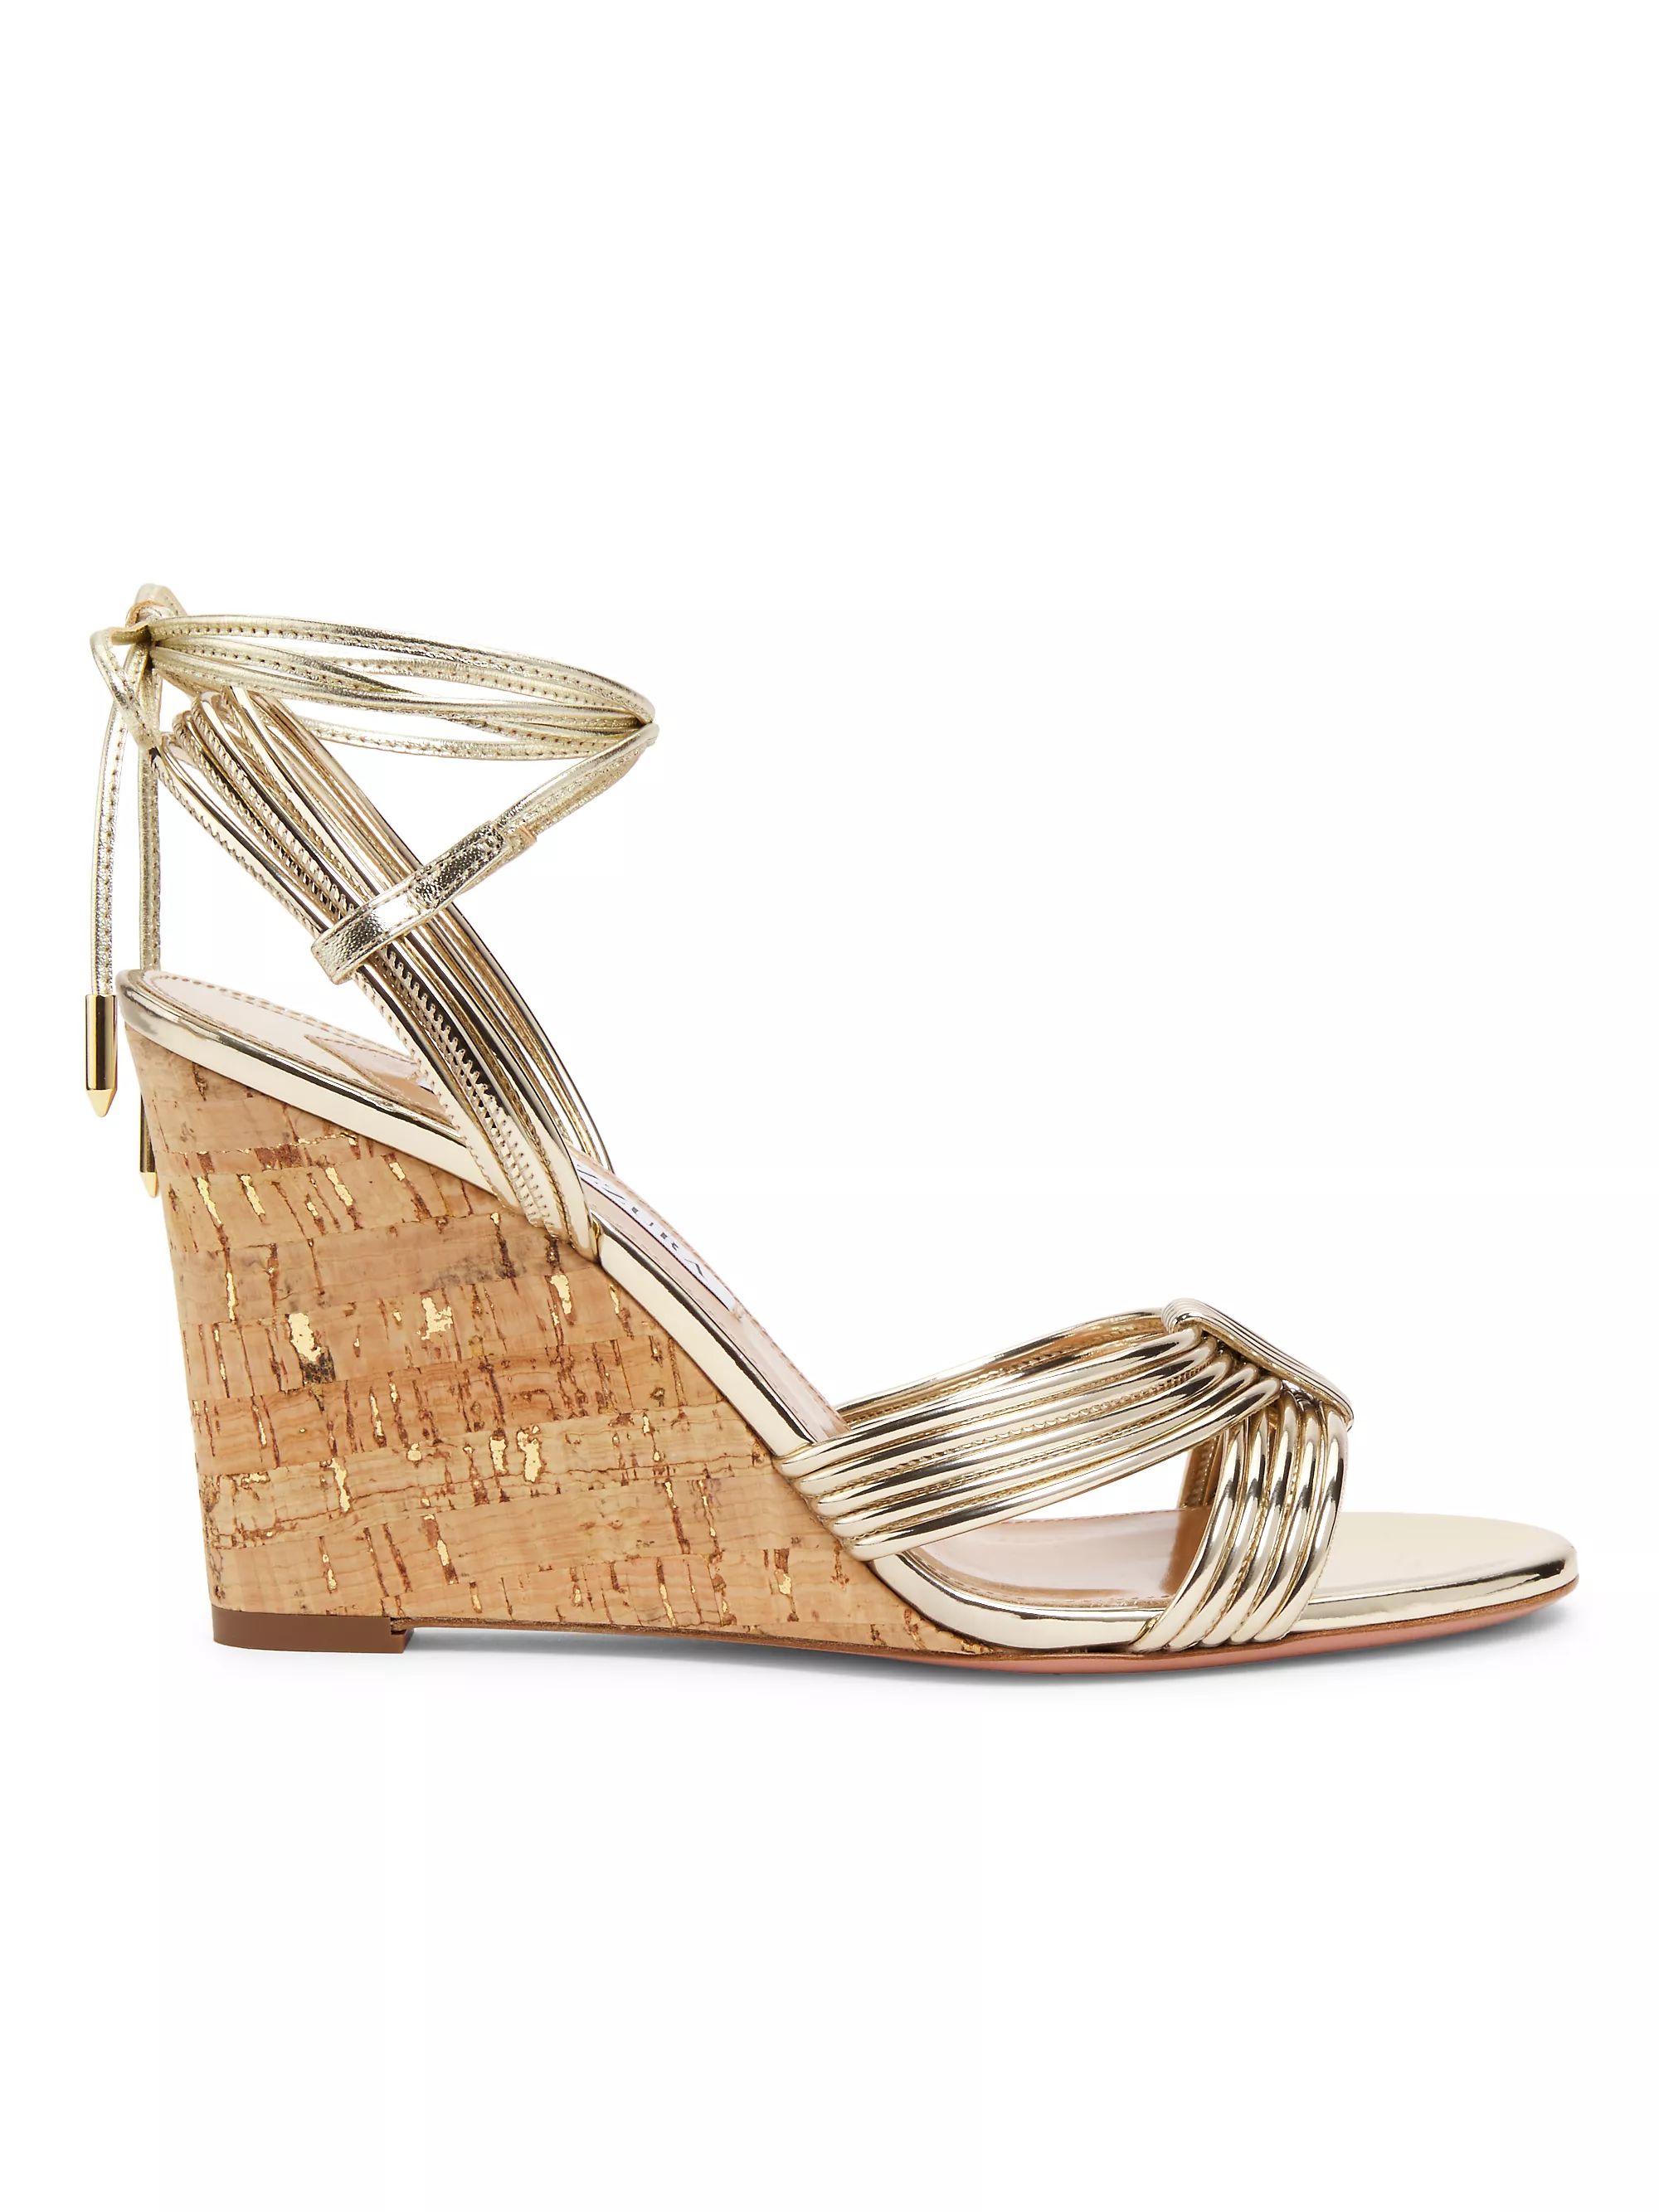 85MM Strappy Metallic Wedge Sandals | Saks Fifth Avenue